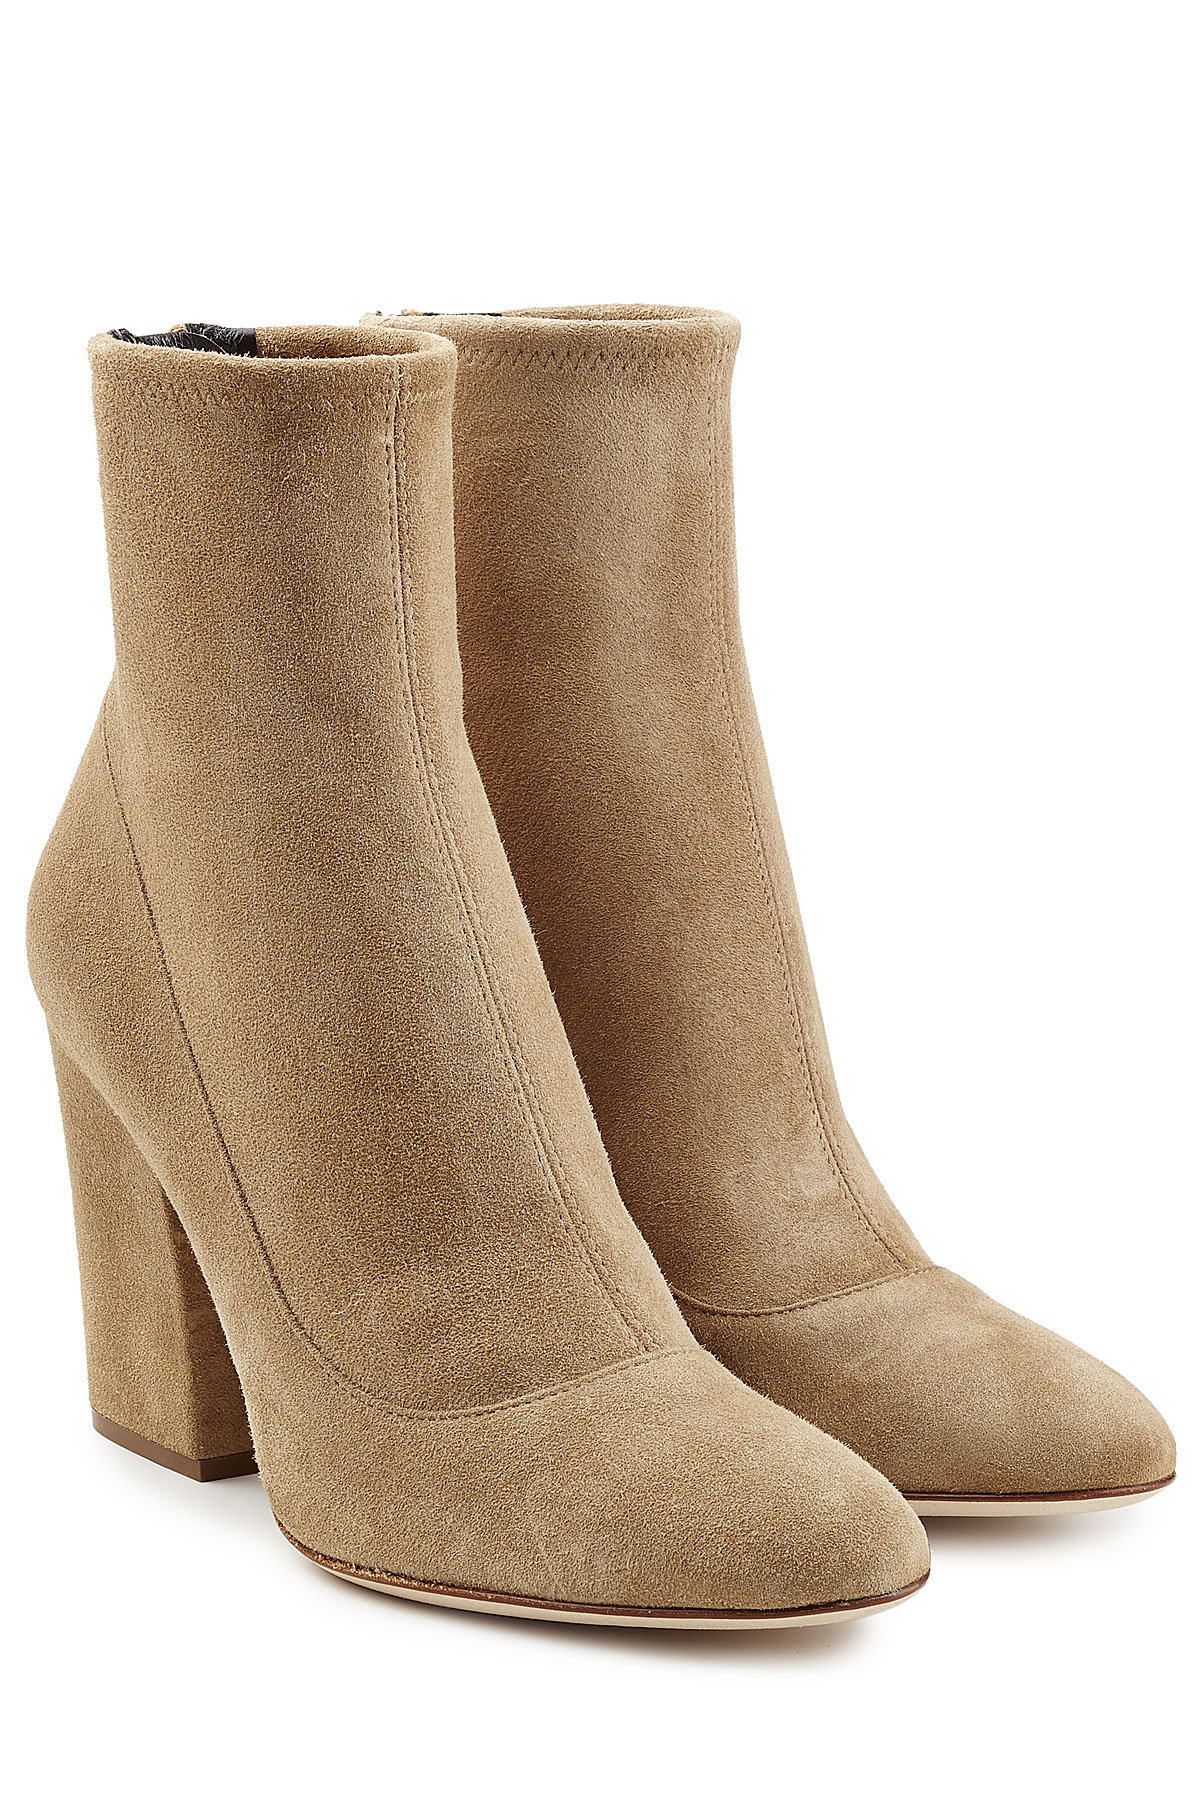 Sergio Rossi - Virgina Suede Ankle Boots